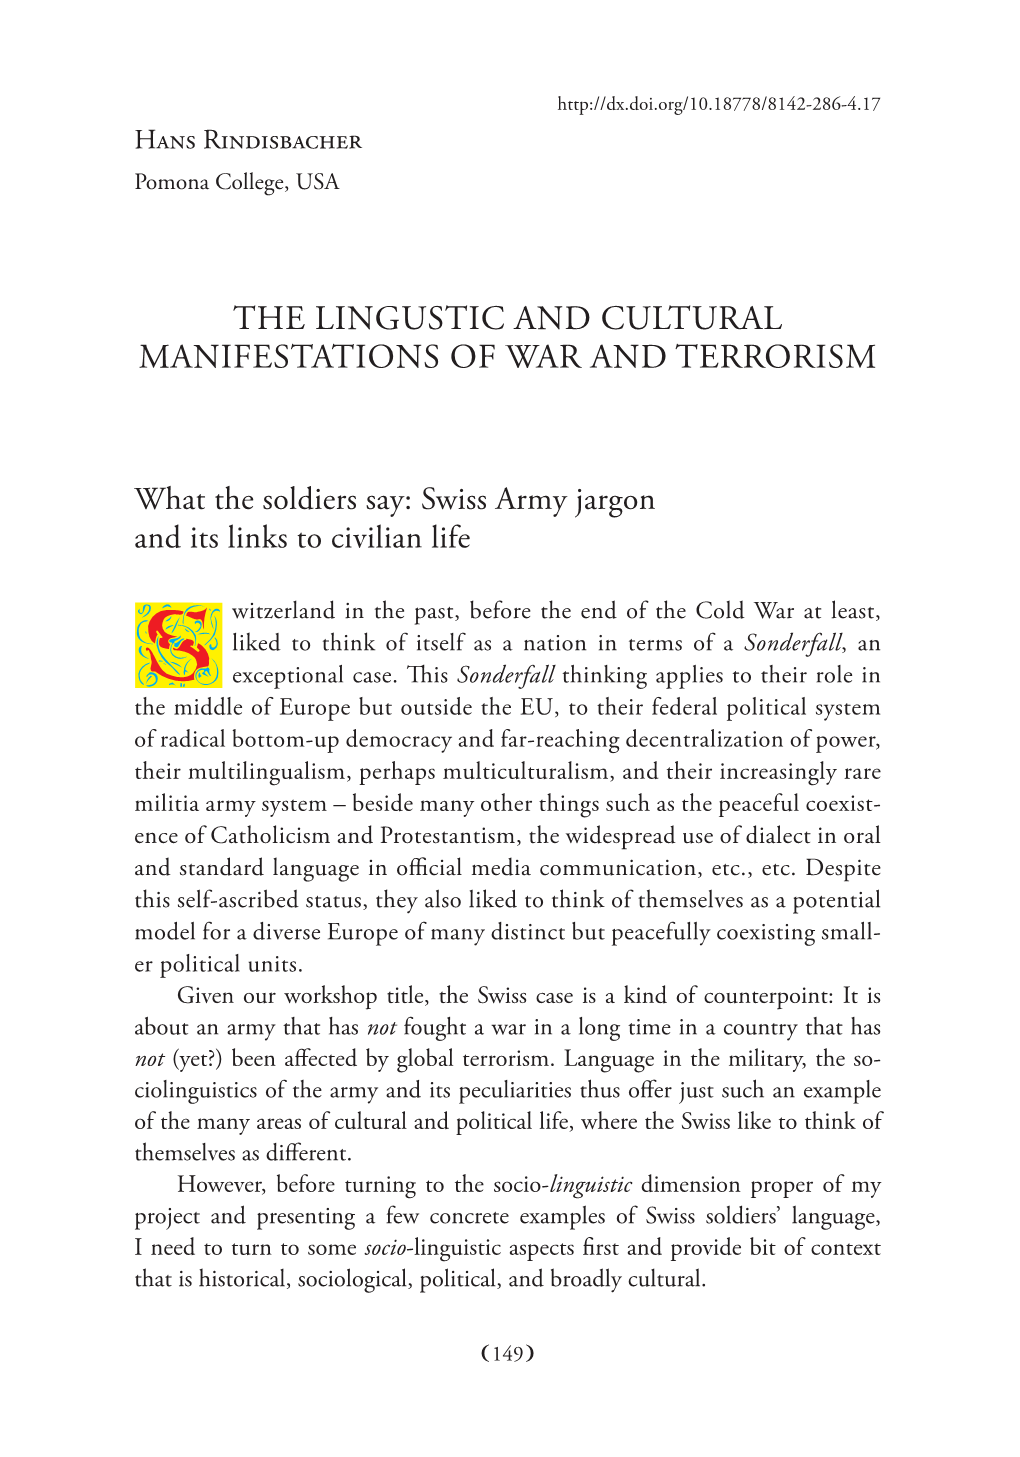 The Lingustic and Cultural Manifestations of War and Terrorism